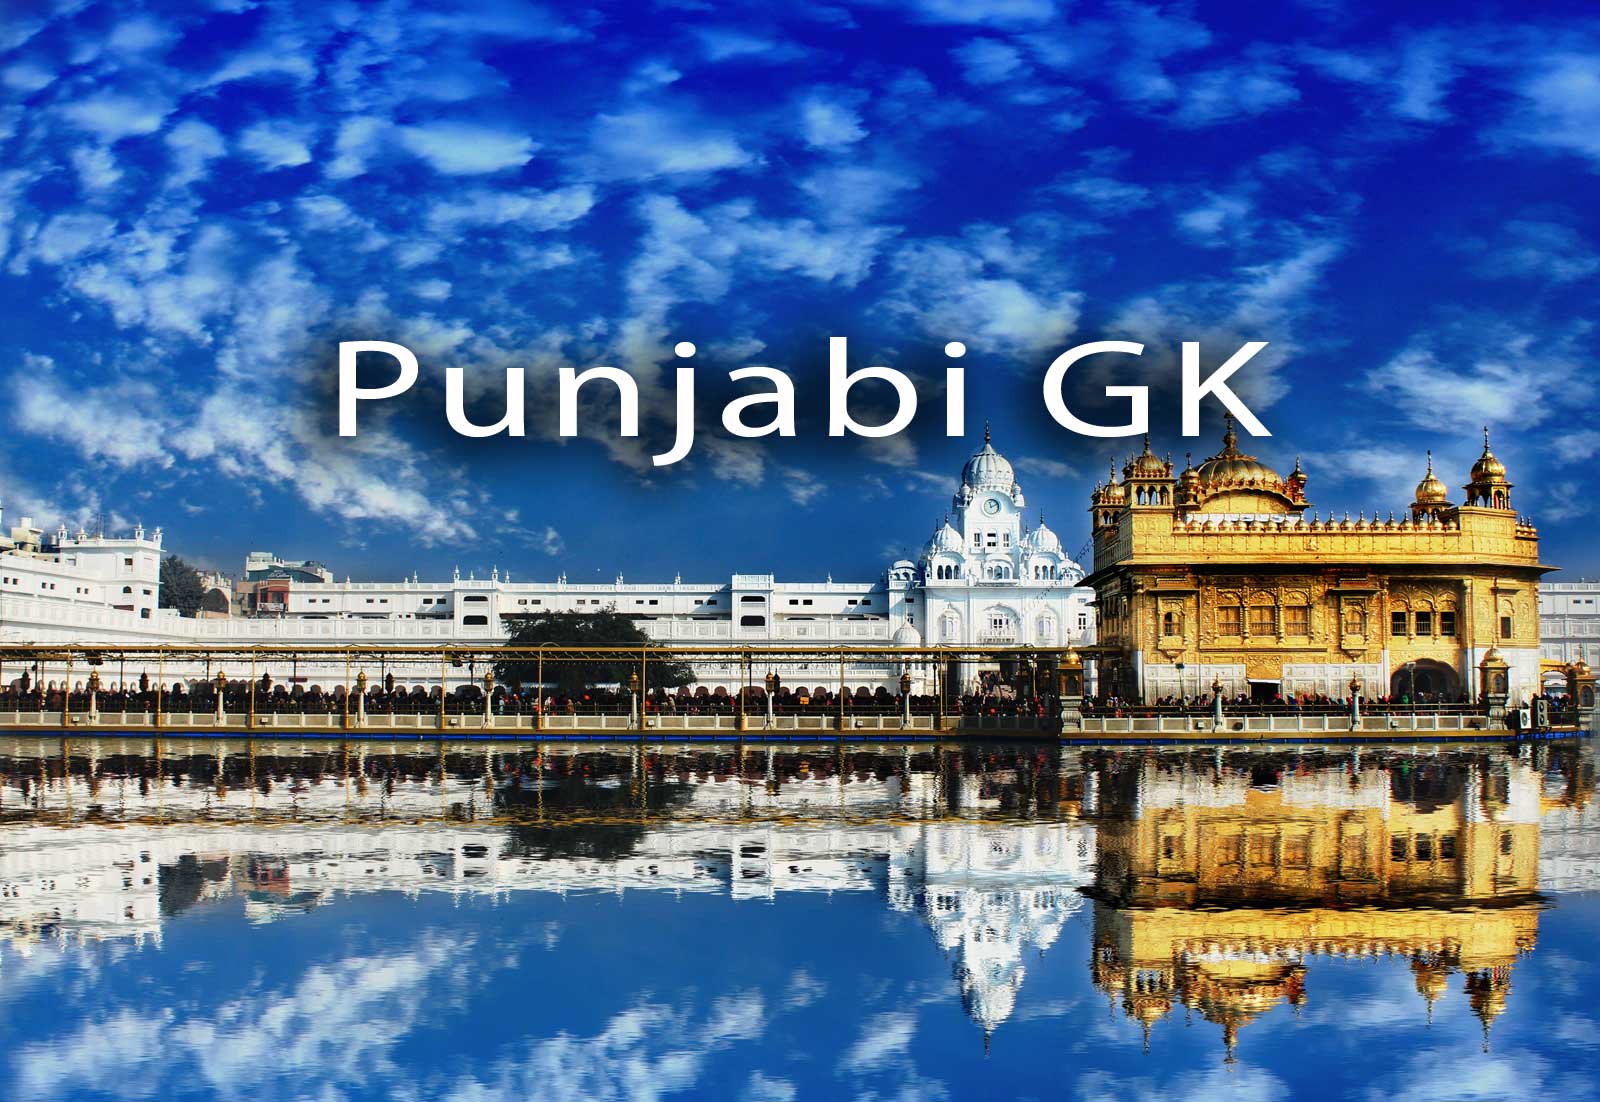 Punjabi GK Sample Questions and Answers